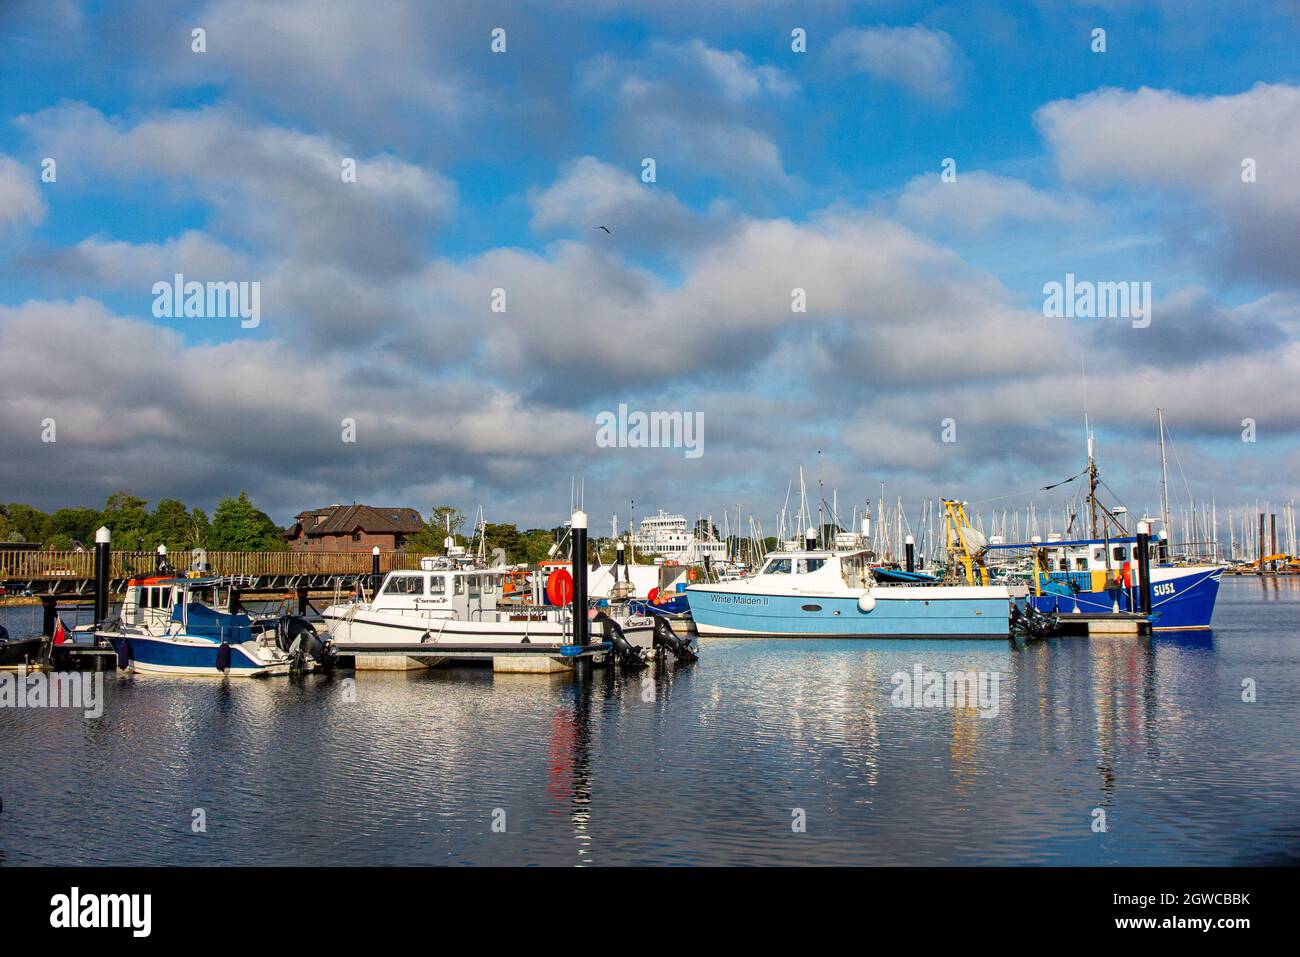 The Isle of Wight Ferry and fishing boats in Lymington Harbour, Hampshire, England Stock Photo